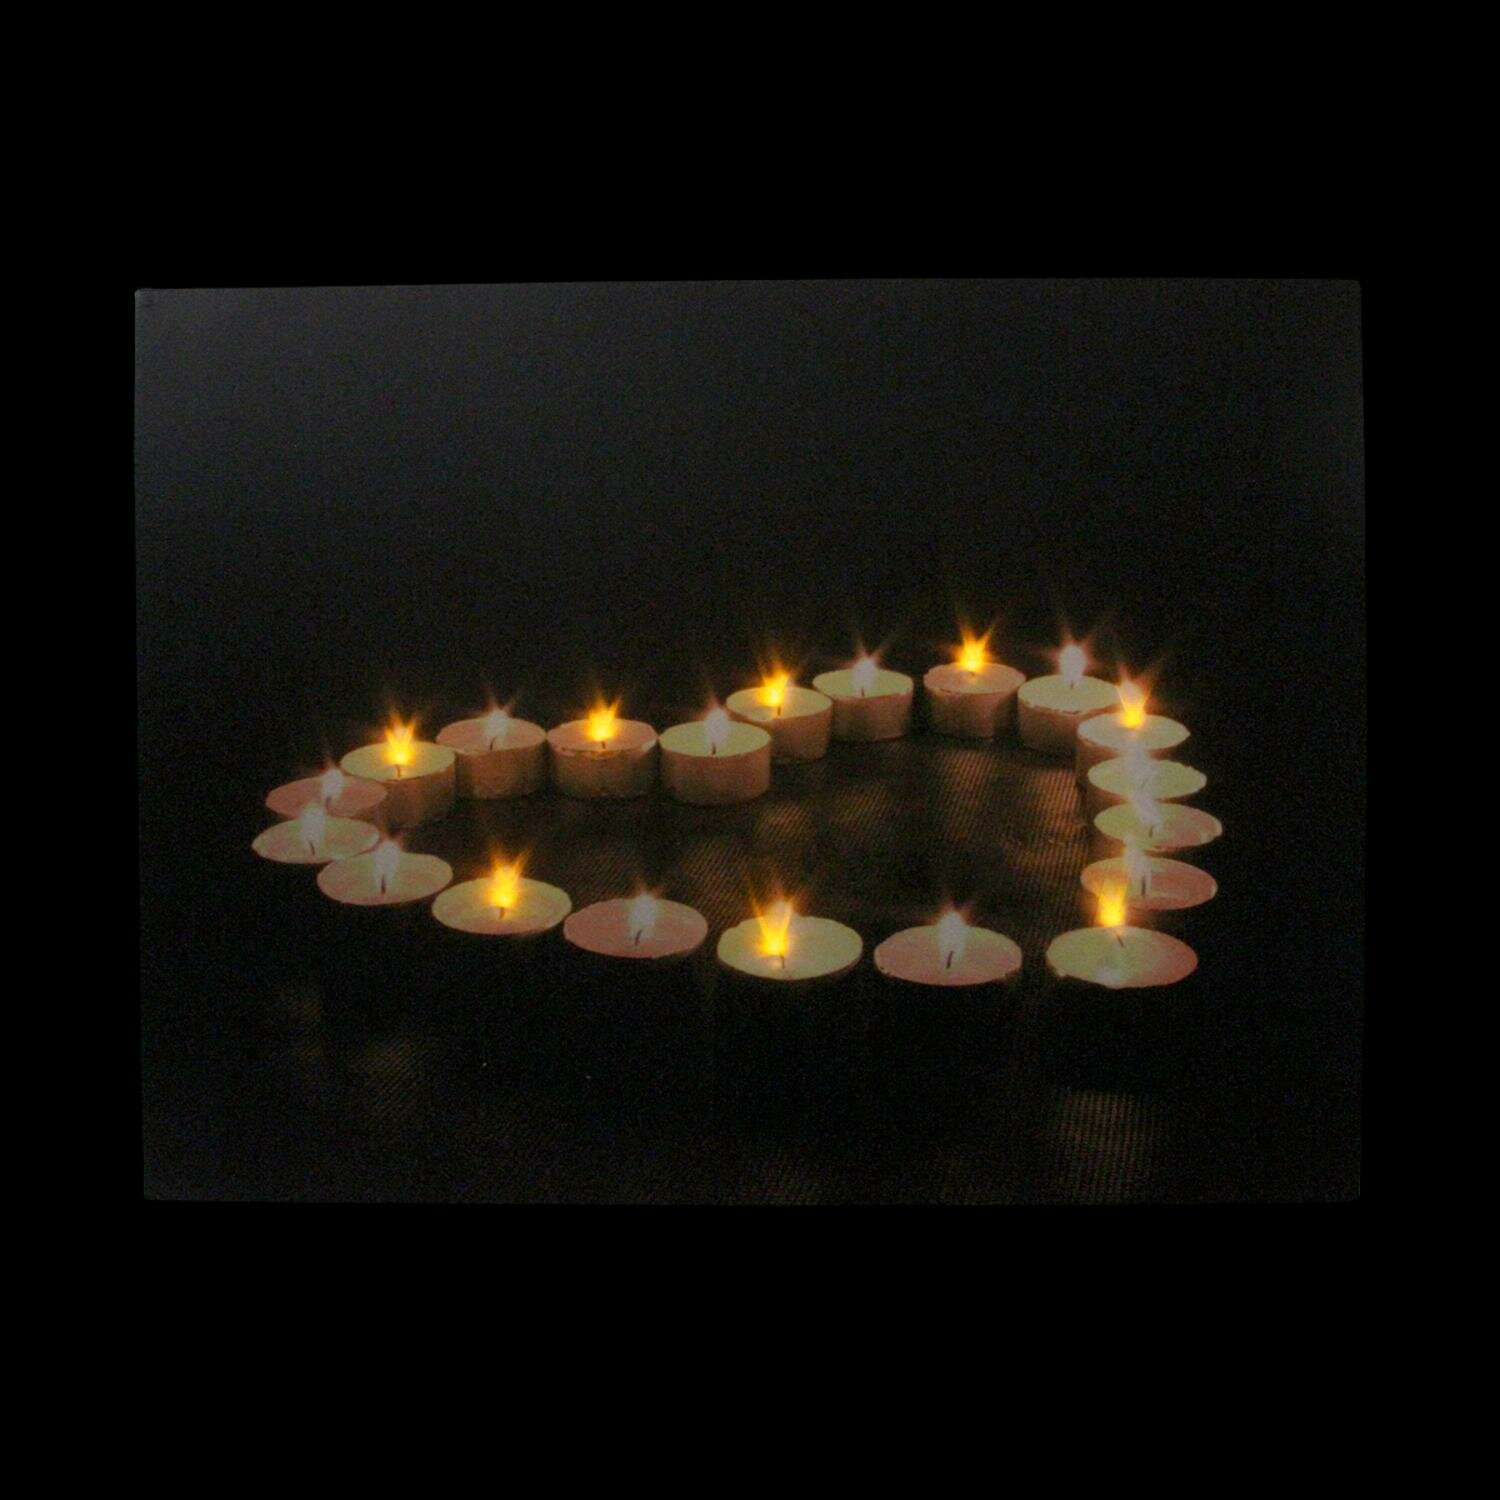 LED Lighted Flickering Heart-Shaped Candles Canvas Wall Art 15.75